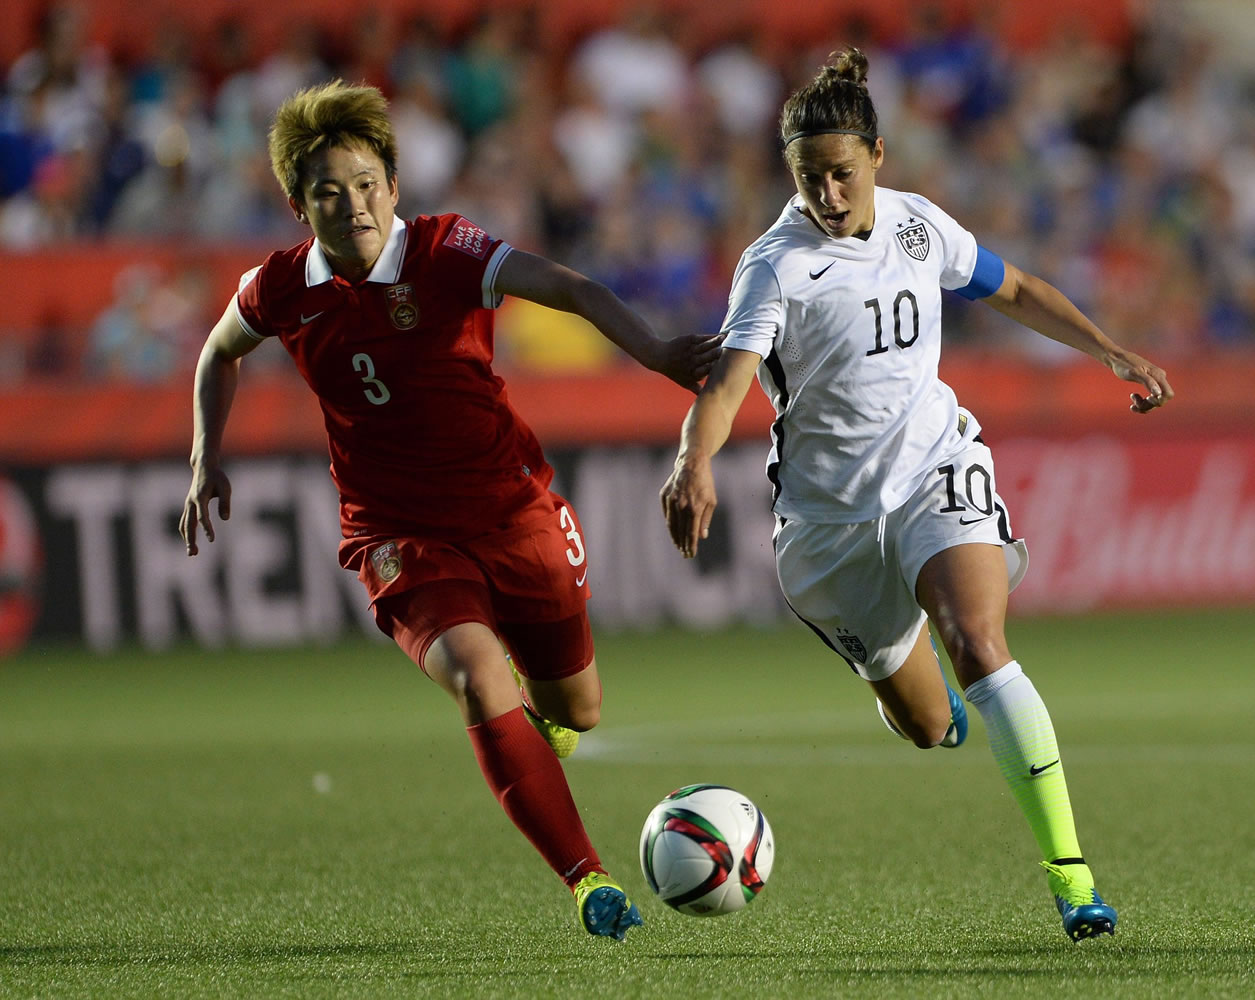 China's Pang Fengyue (3) chases United States' Carli Lloyd (10) during the second half of a quarterfinal match in the FIFA Women's World Cup soccer tournament, Friday, June 26, 2015, in Ottawa, Ontario, Canada.